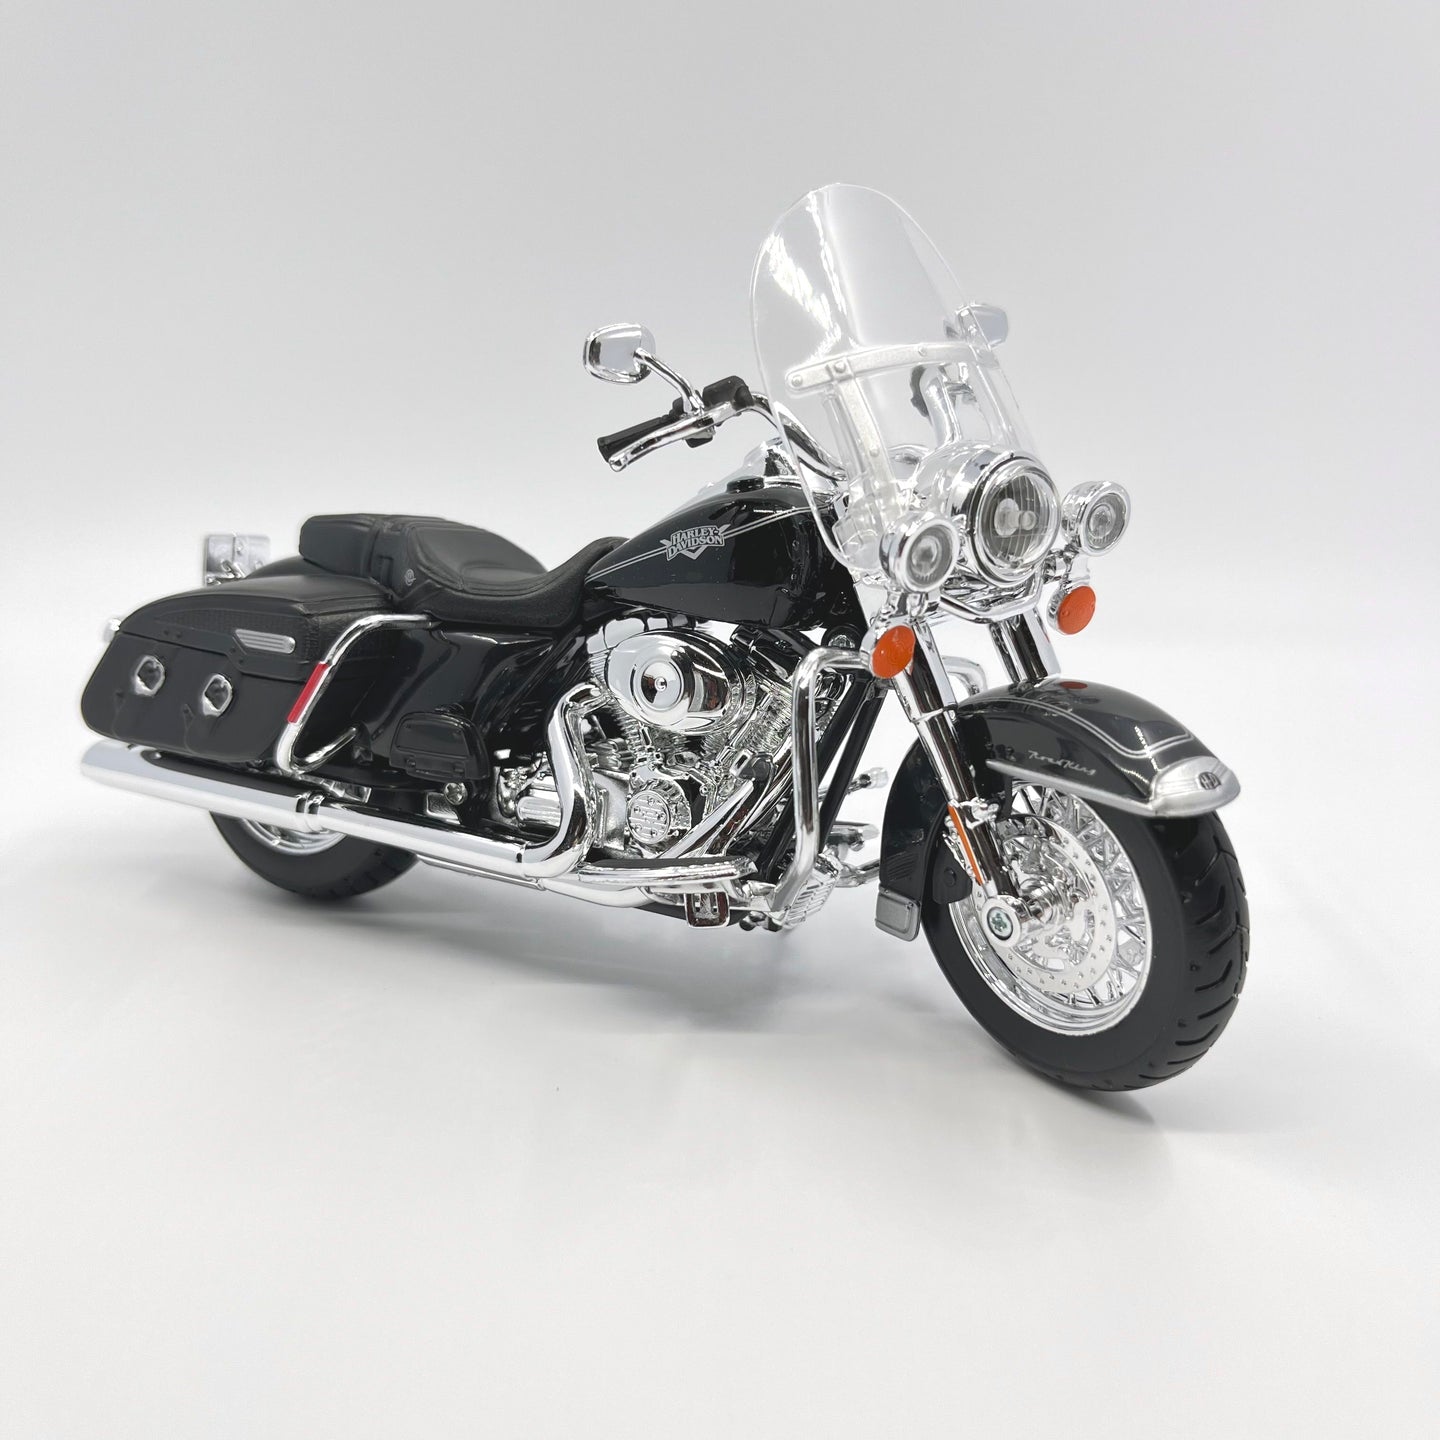 Harley Davidson FLHRC Road King Classic 1:12 Diecast Bike Motorcycle Model By Maisto